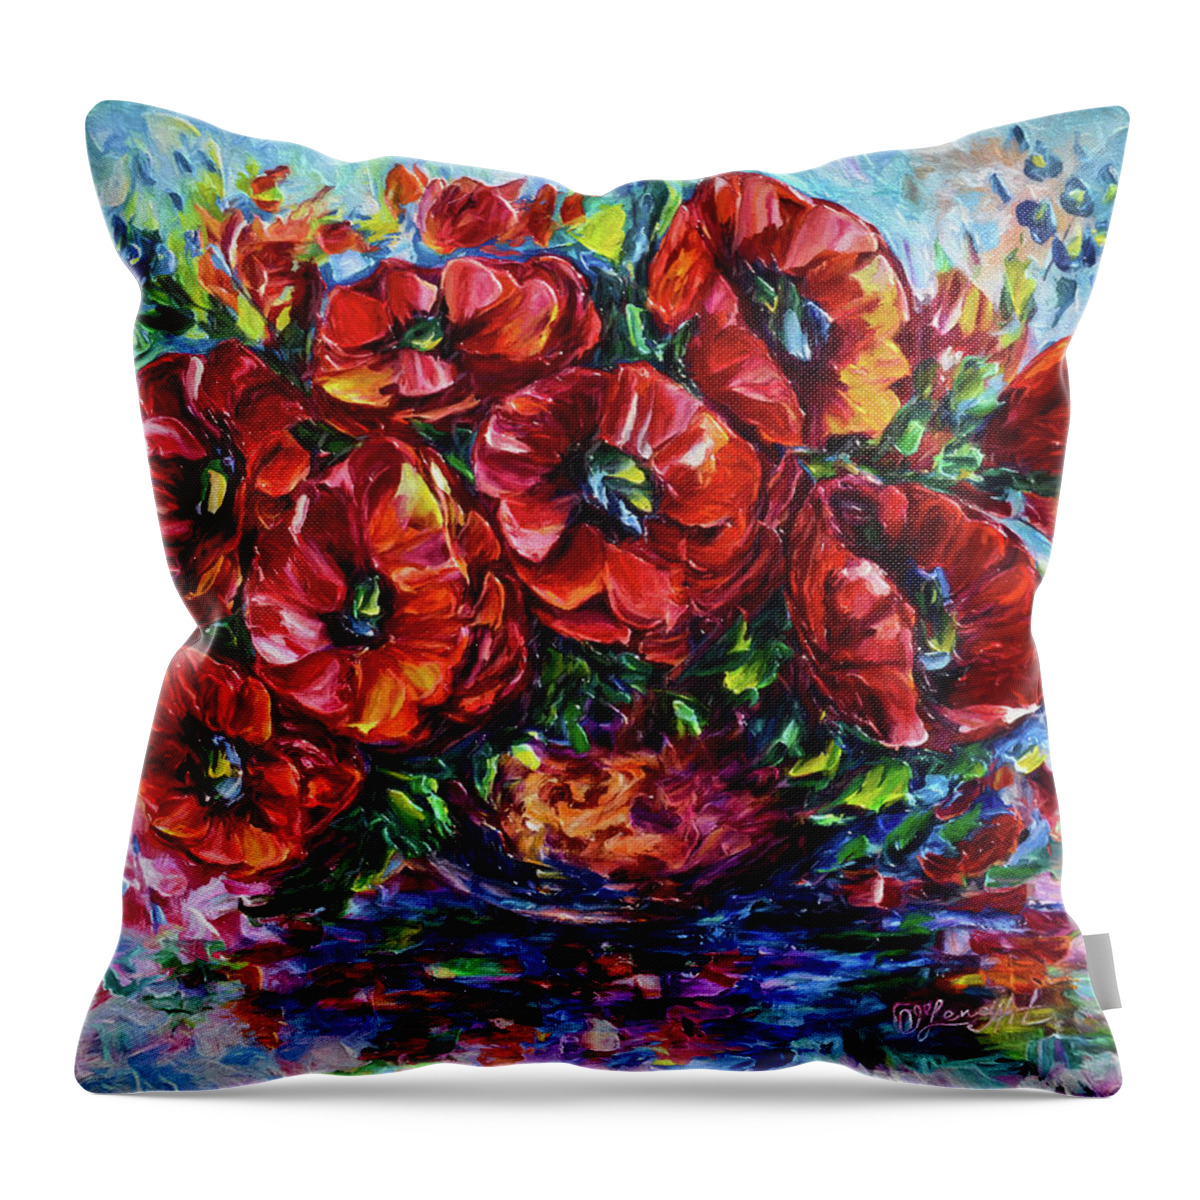  #flowers Throw Pillow featuring the painting Red Poppies In A Vase by O Lena